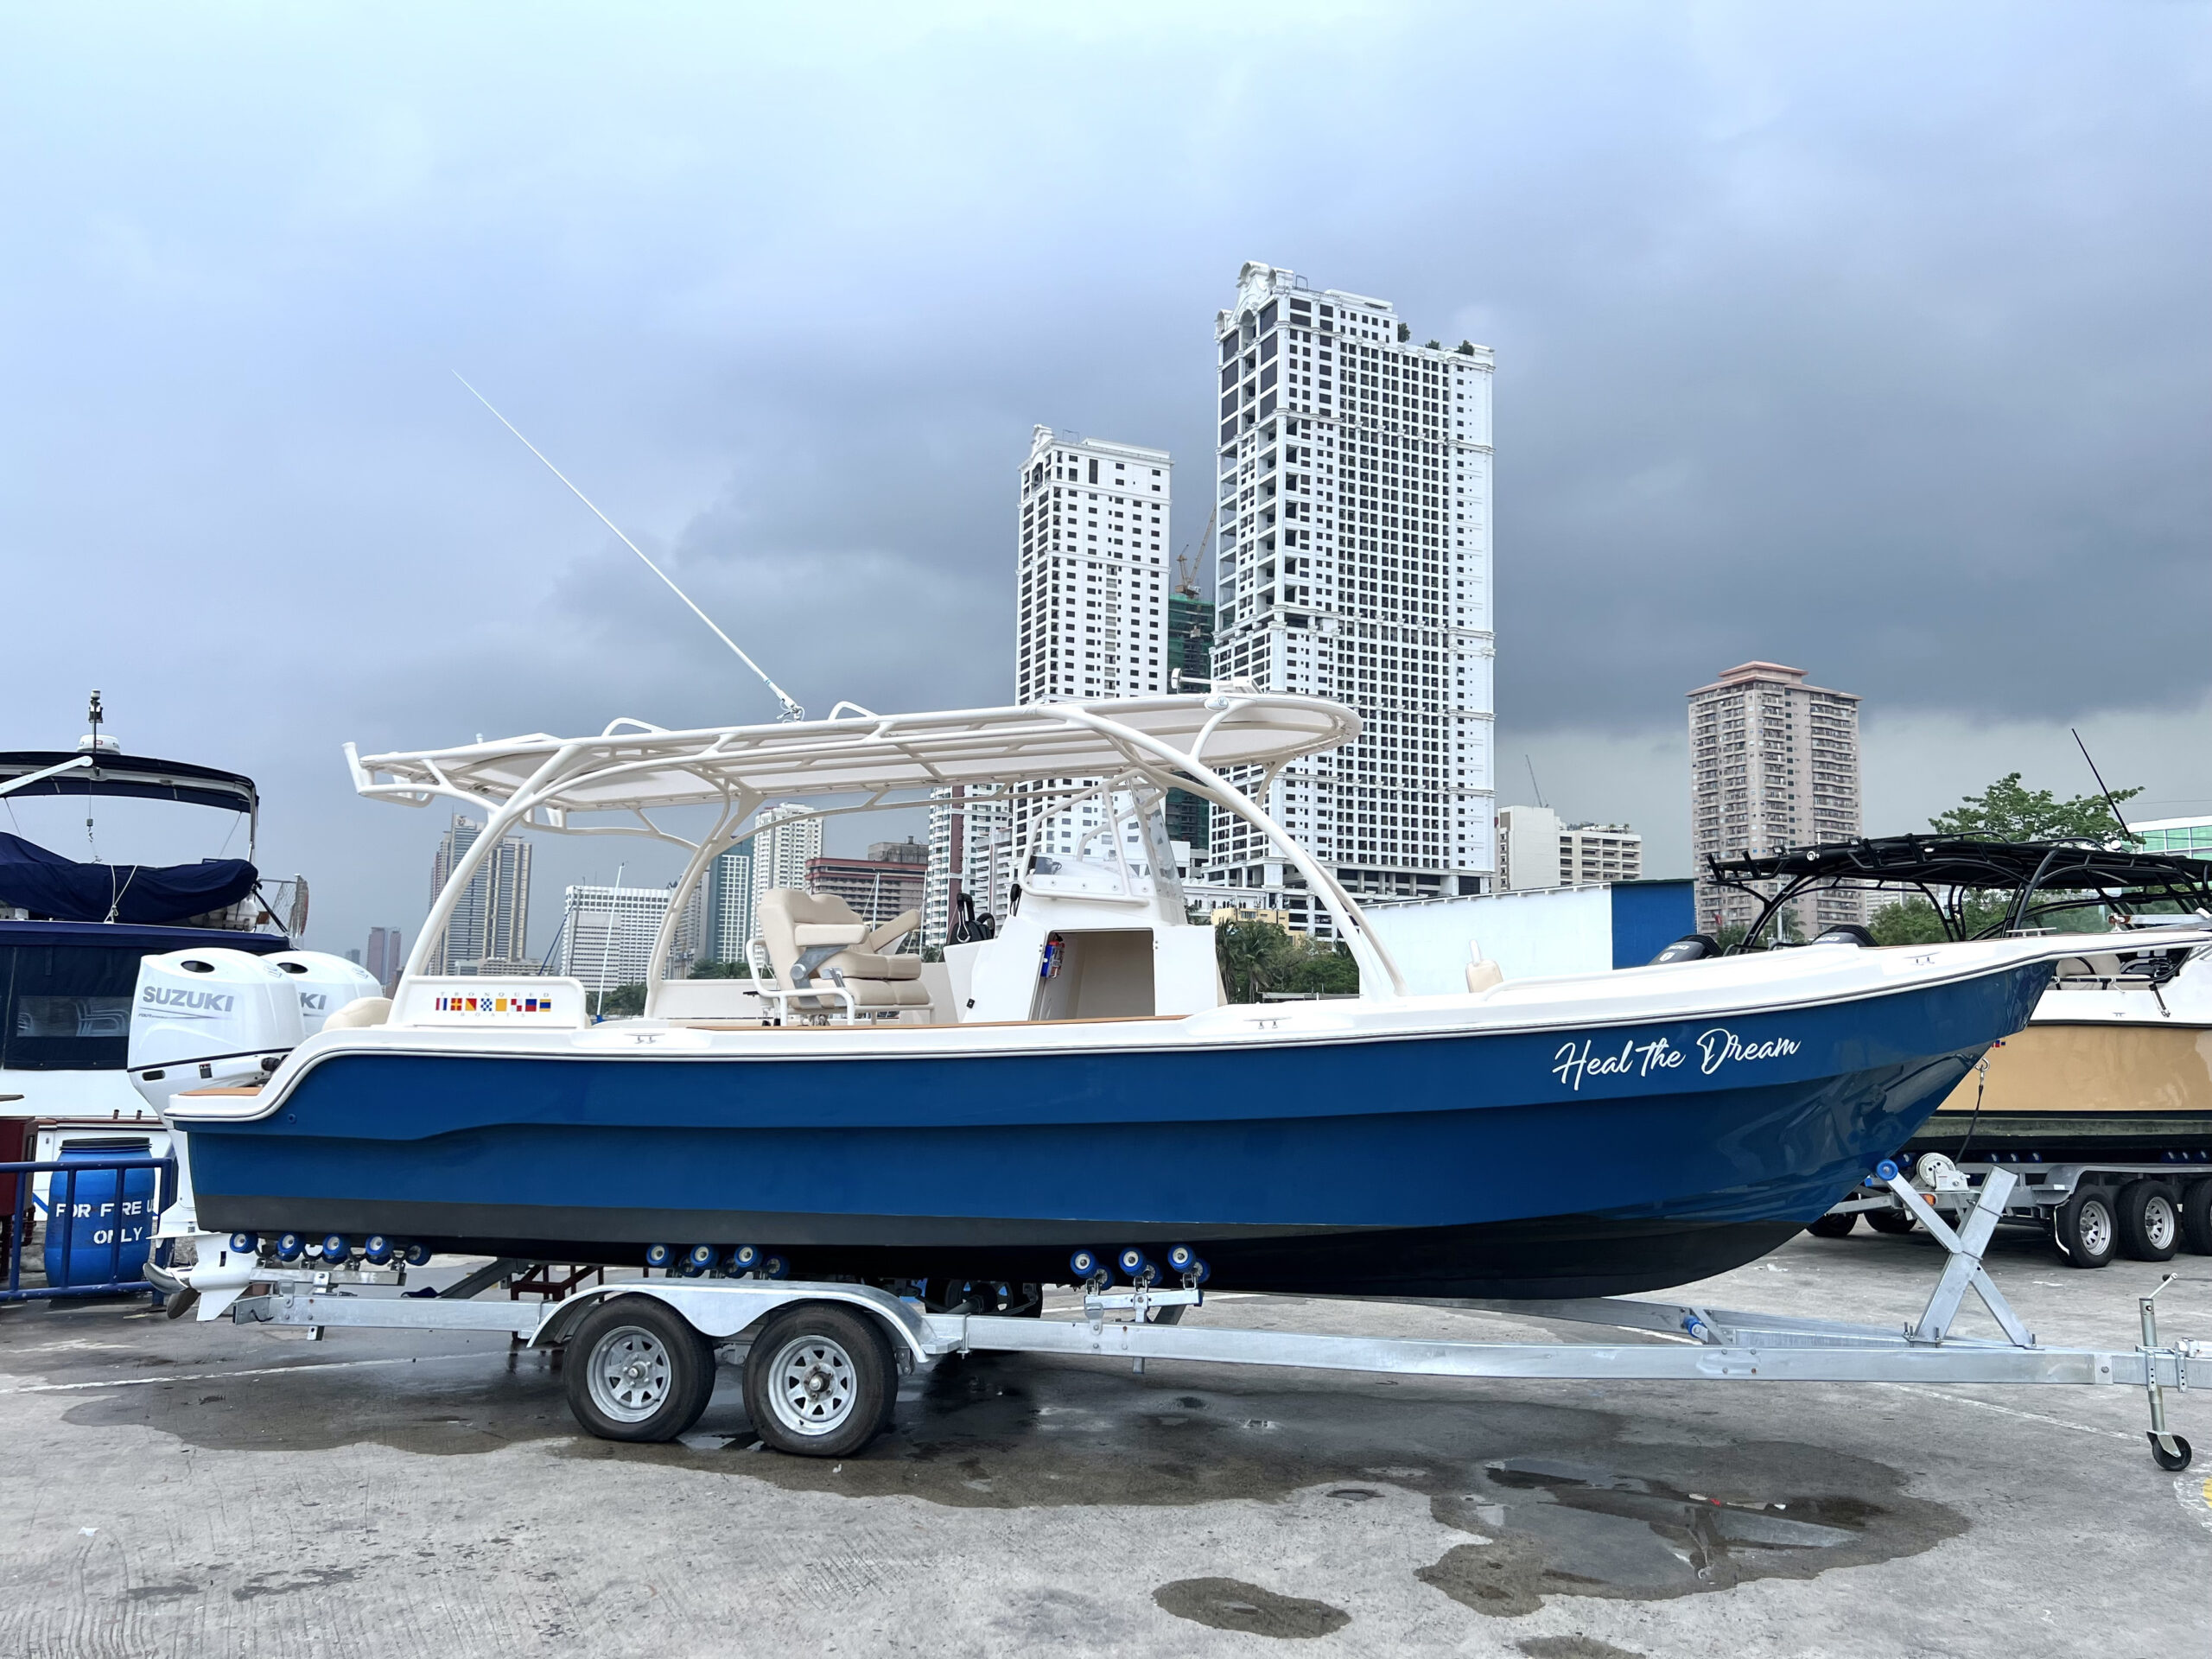 28 seafarer boat in white and blue